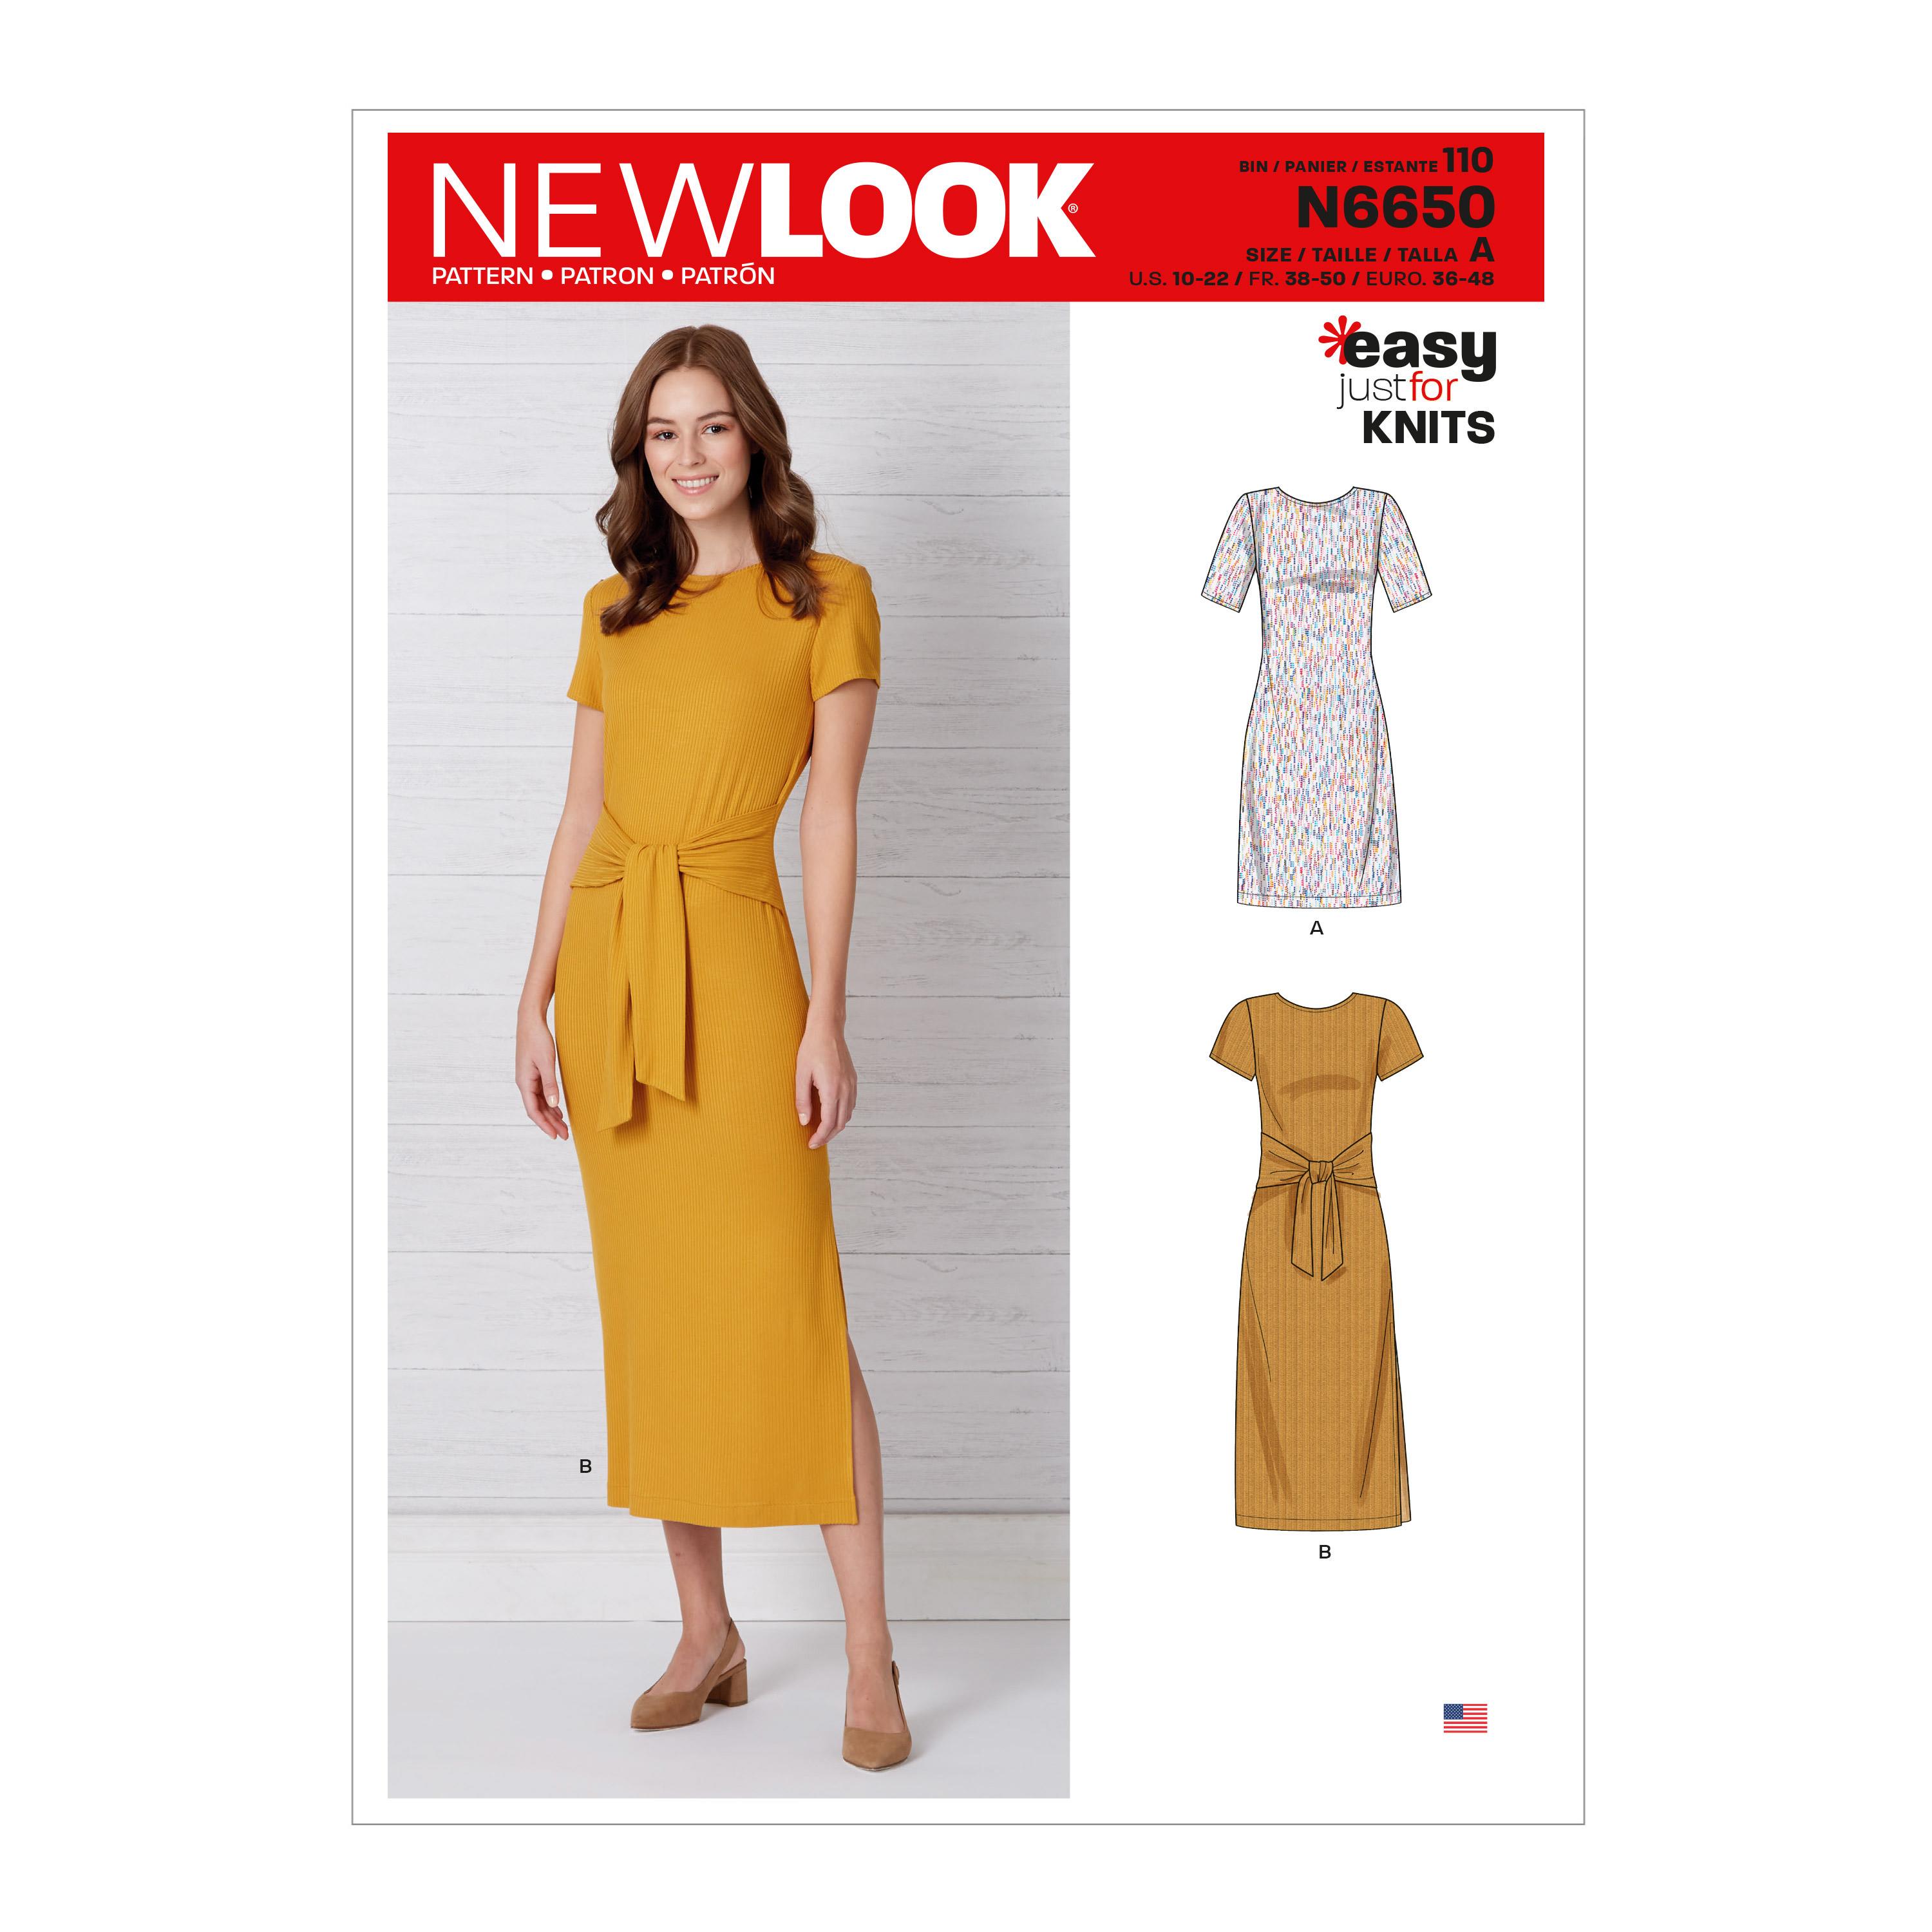 New Look Sewing Pattern N6650 Misses' Knit Dress With Sleeve & Length Variations